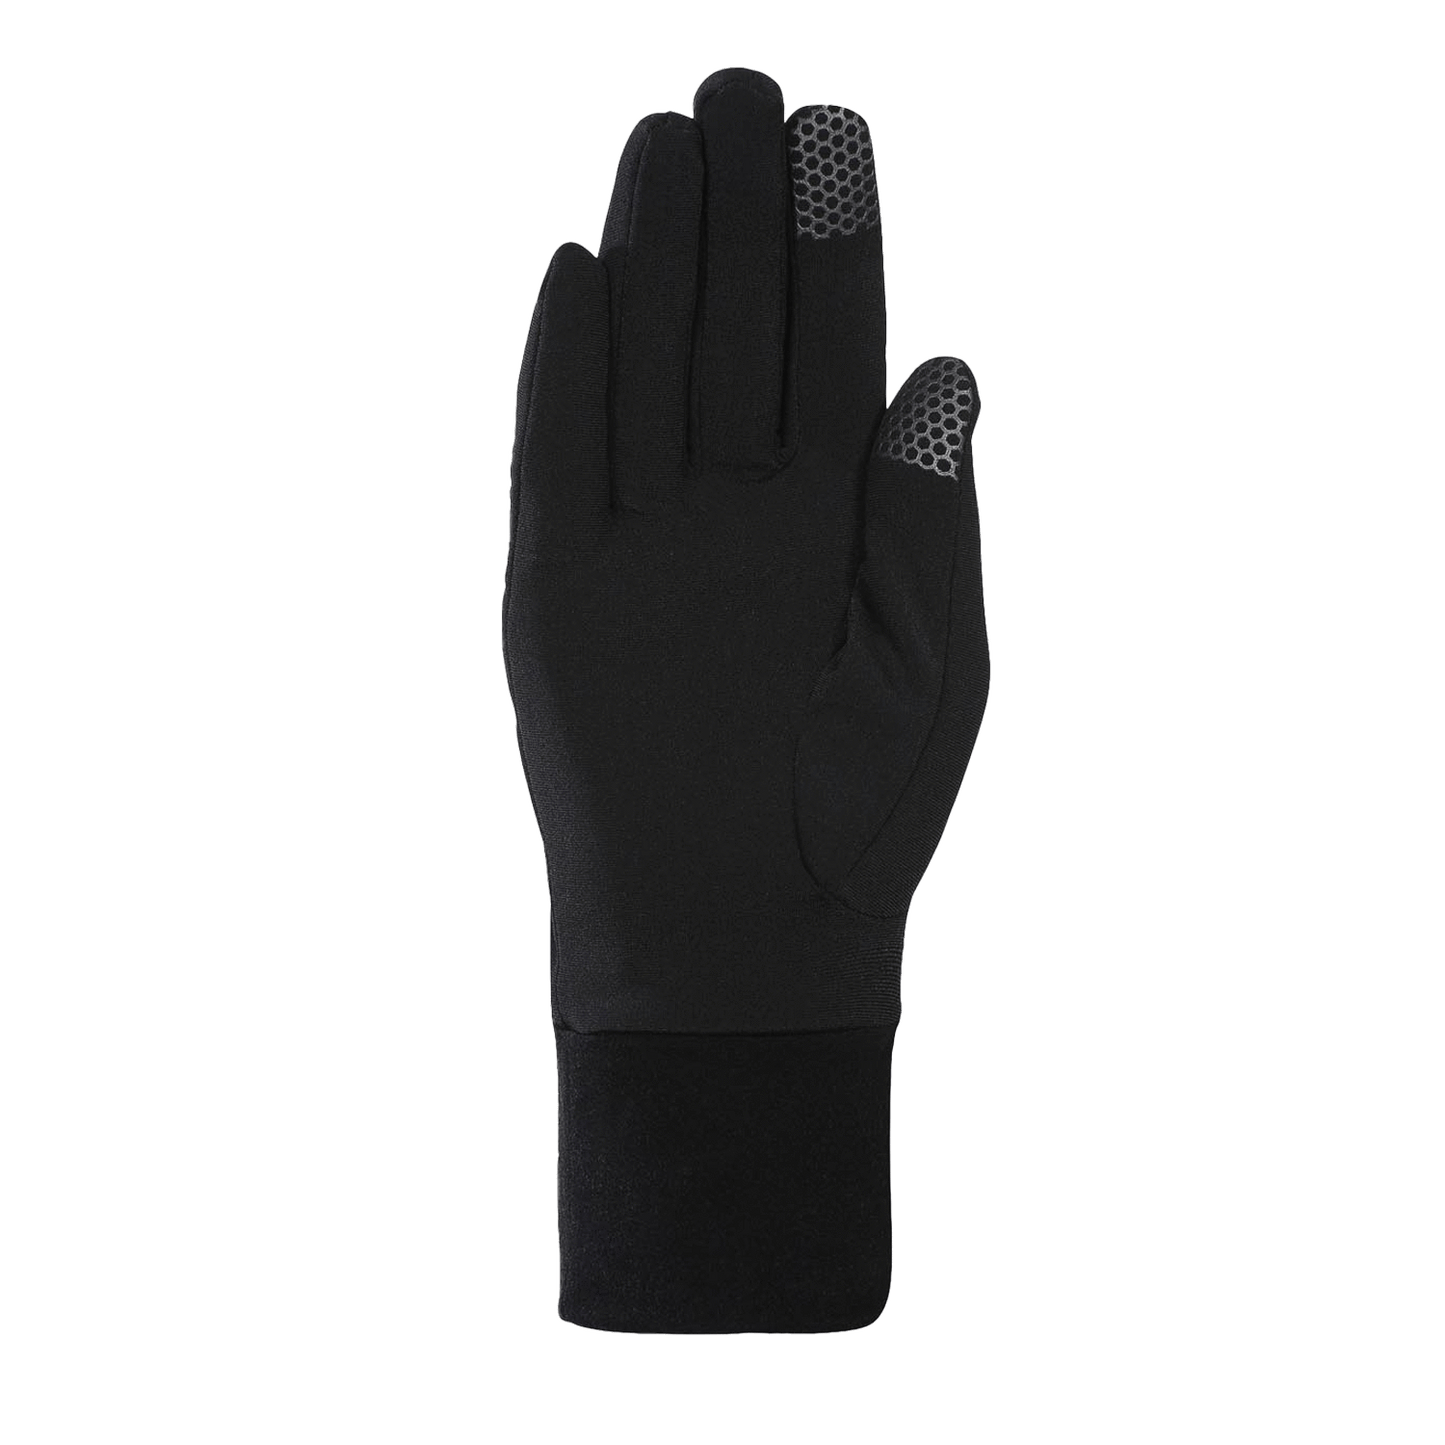 Kombi-F-sous P3 Touch Screen Liner Gloves